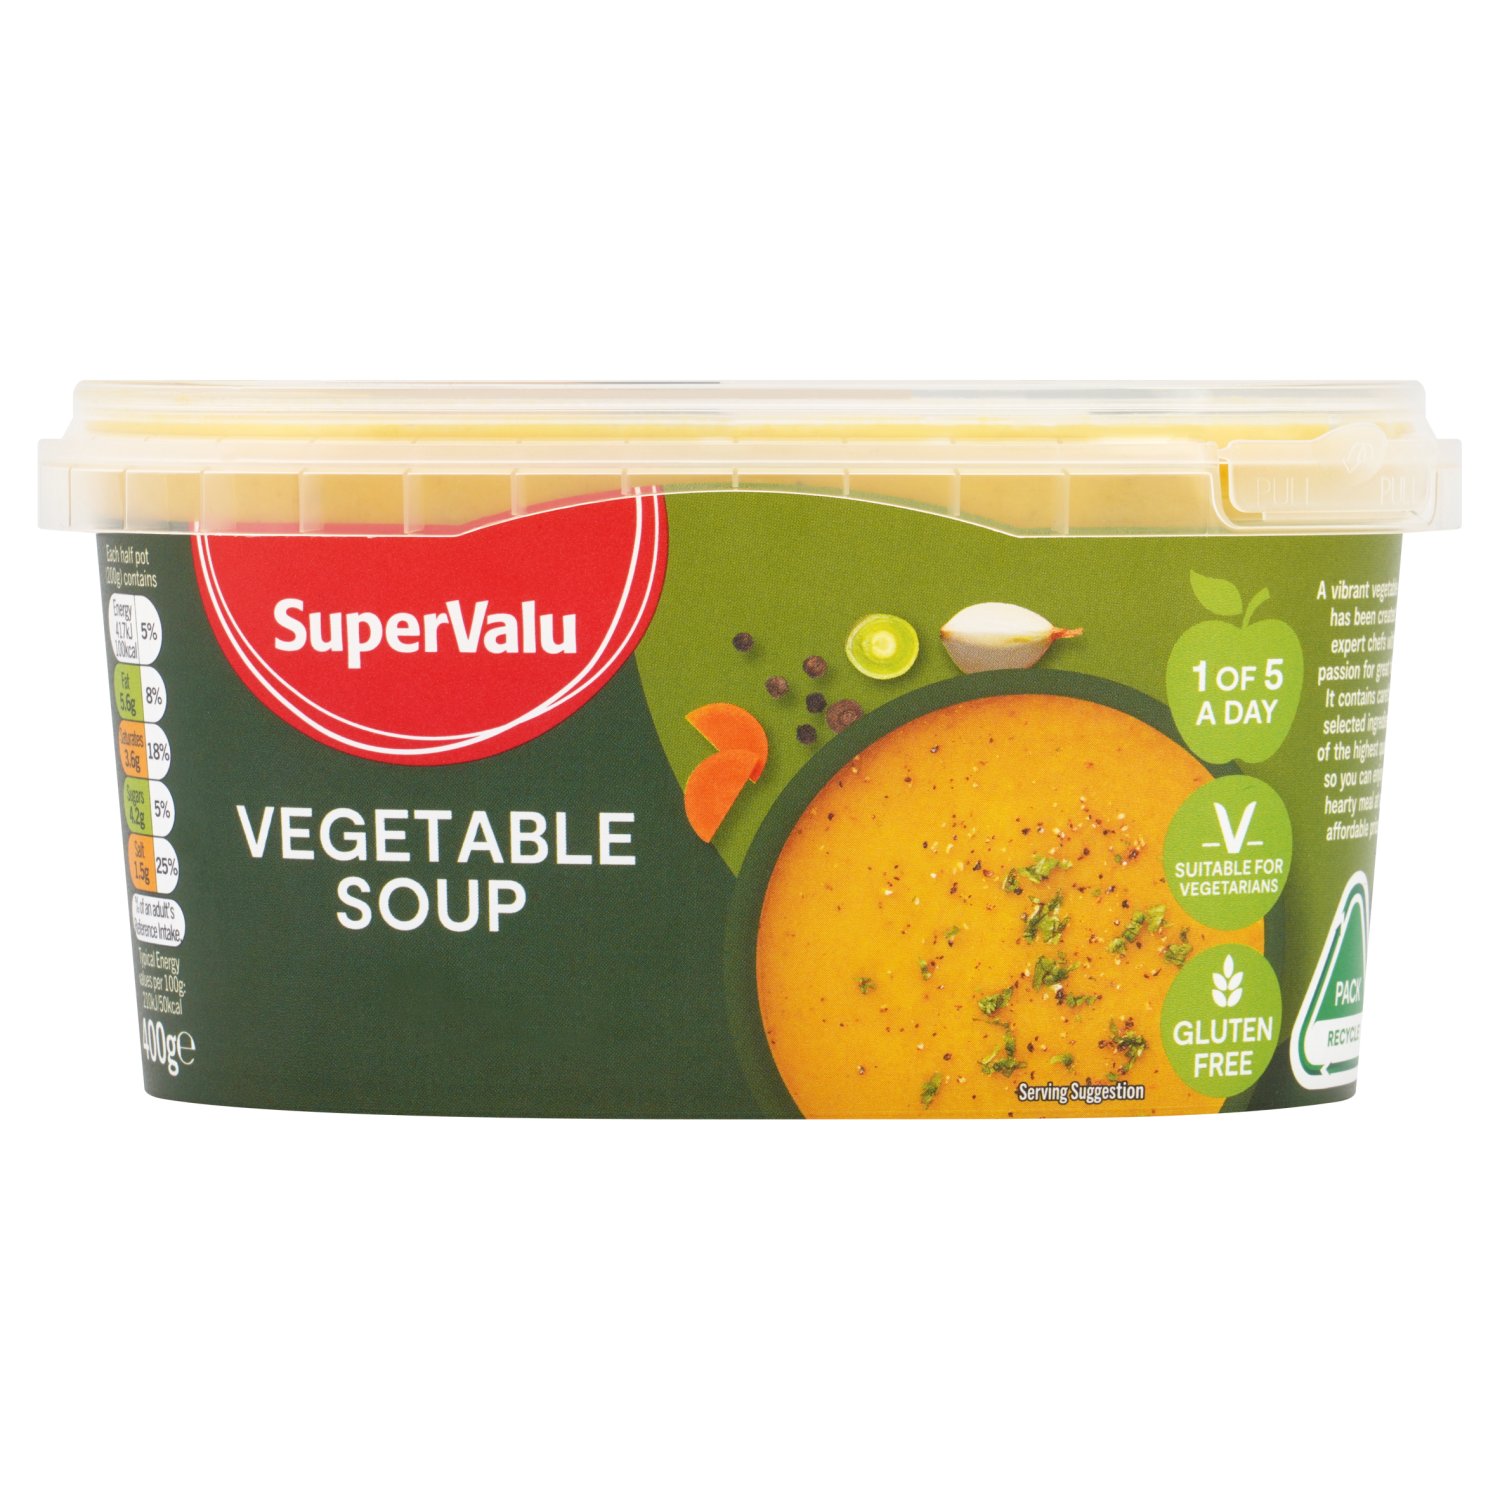 5 a day: It's recommended that we eat at least 5 portions of fruit and vegetables everyday to maintain a healthy lifestyle. 200g of SuperValu Vegetable Soup equals 1 of your 5 a day.

A vibrant vegetable soup has been created by expert chefs with a passion for great food. It contains carefully selected ingredients of the highest quality so you can enjoy a hearty meal at an affordable price.